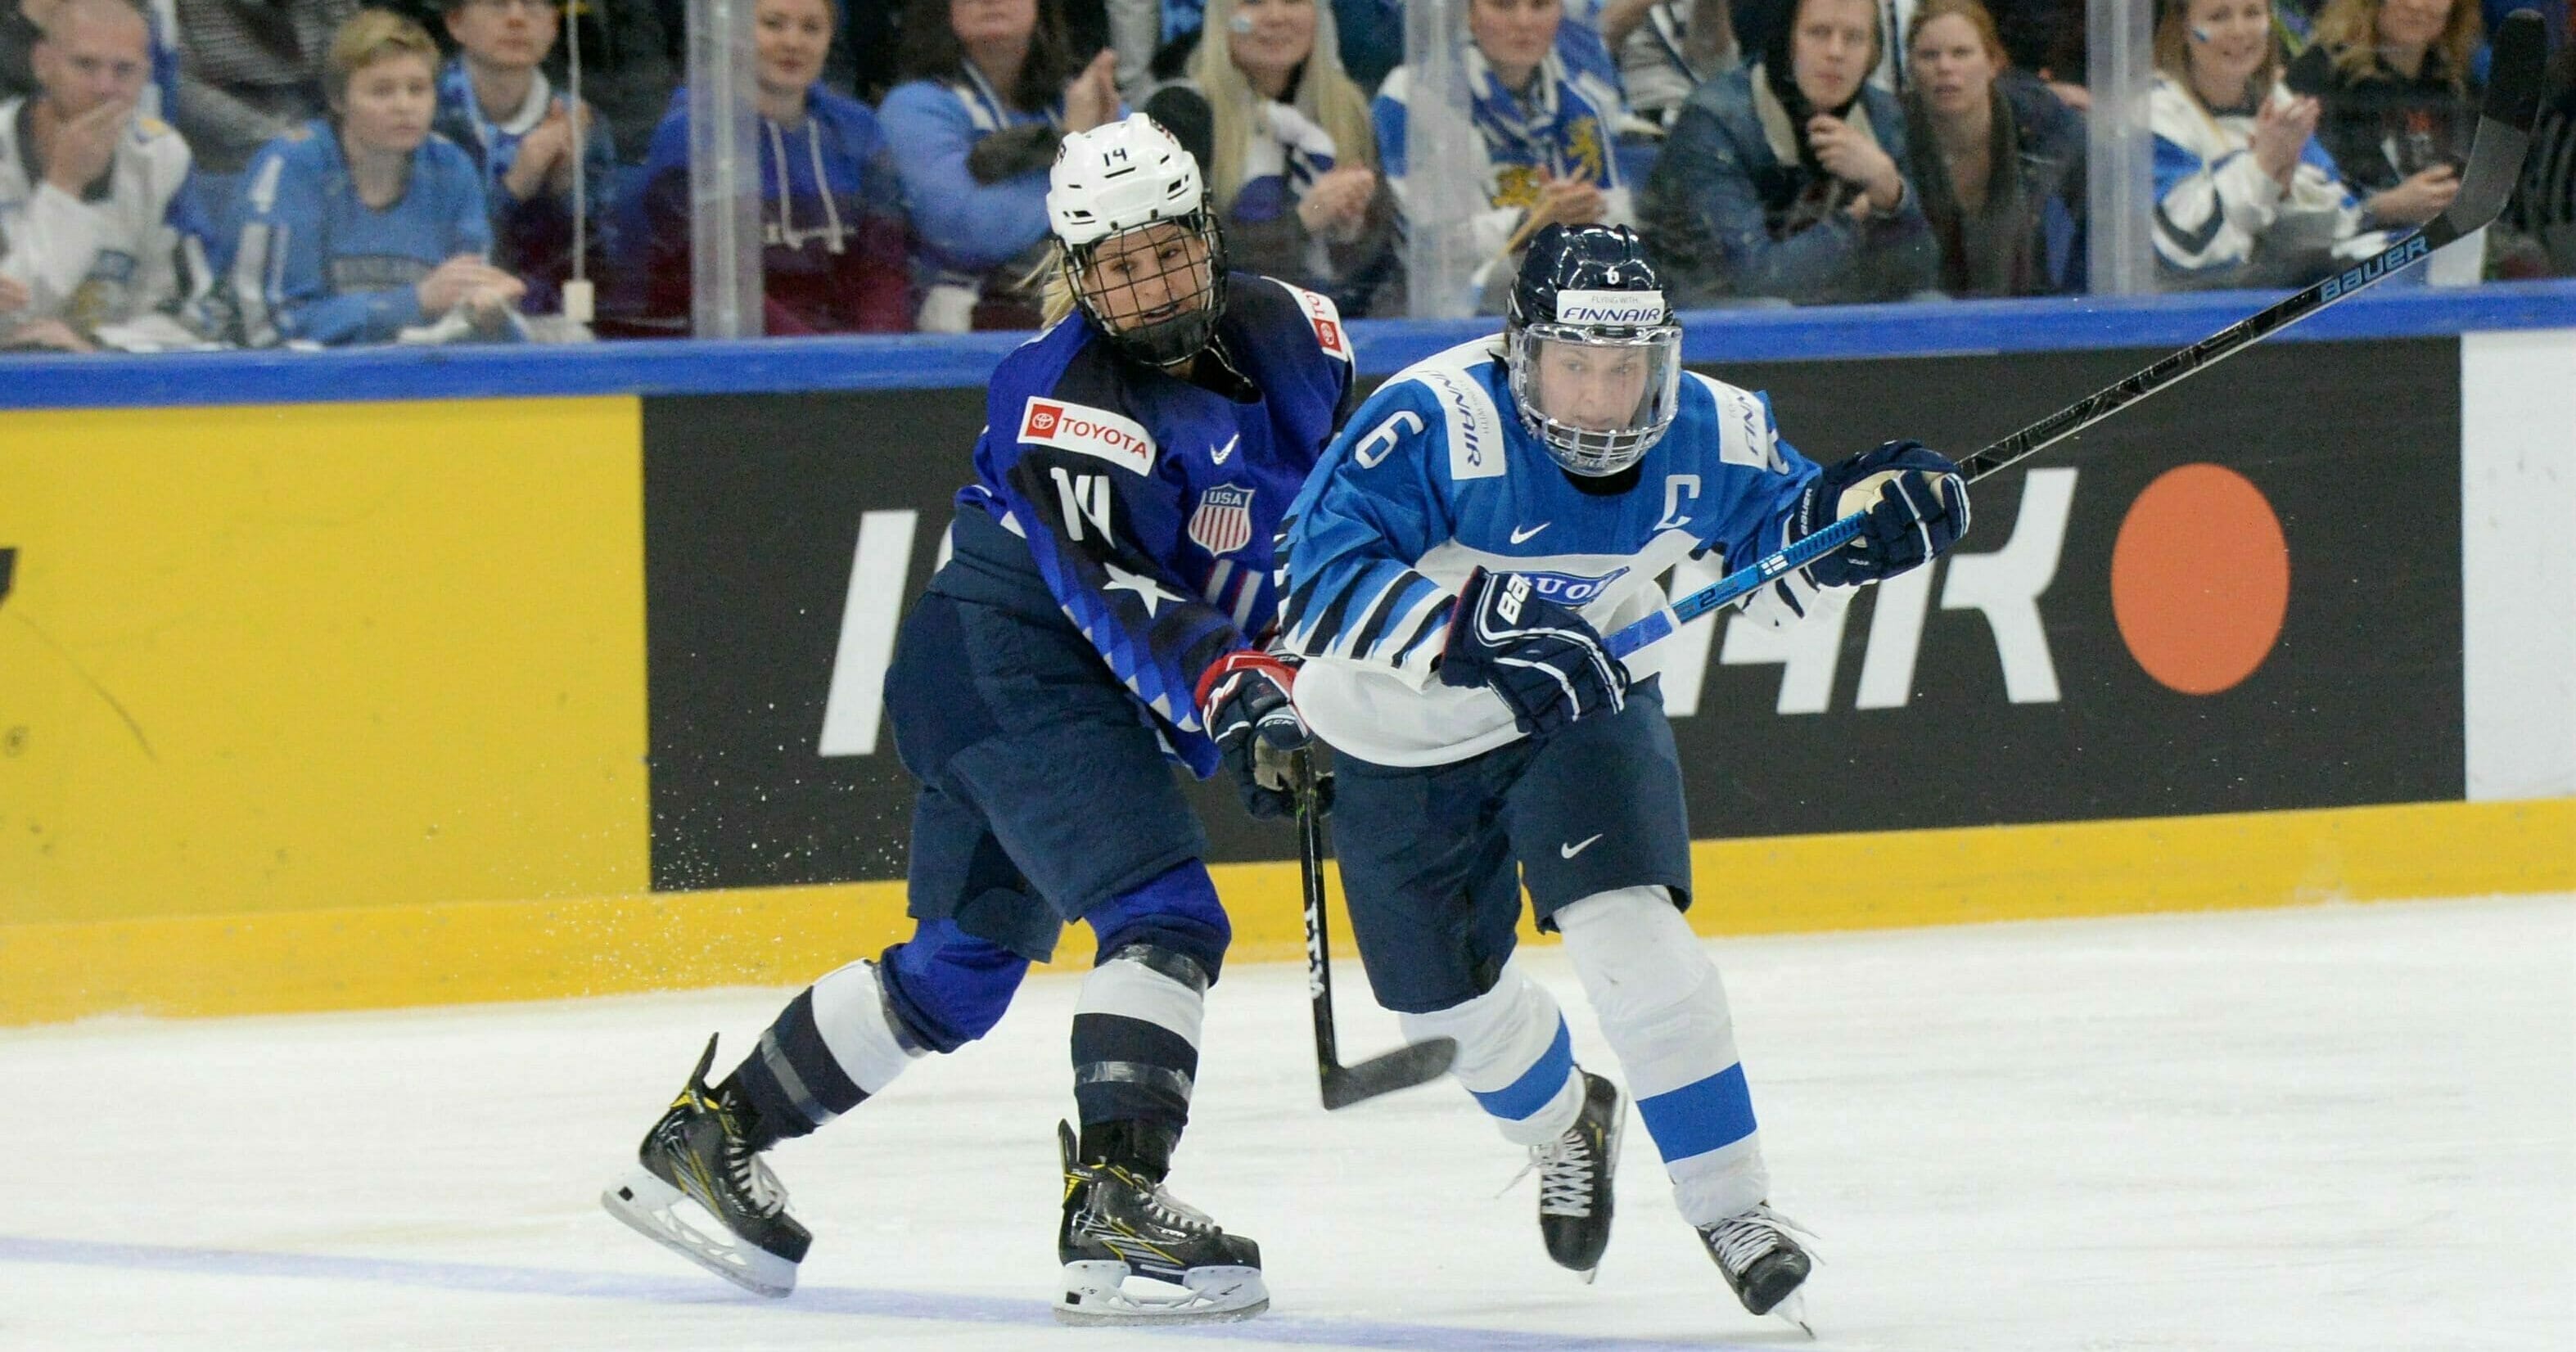 Brianna Decker, left, of the United States and Jenni Hiirikoski of Finland vie for the puck during the IIHF Women's Ice Hockey World Championships final match between the United States and Finland in Espoo, Finland, Sunday, April 14, 2019.